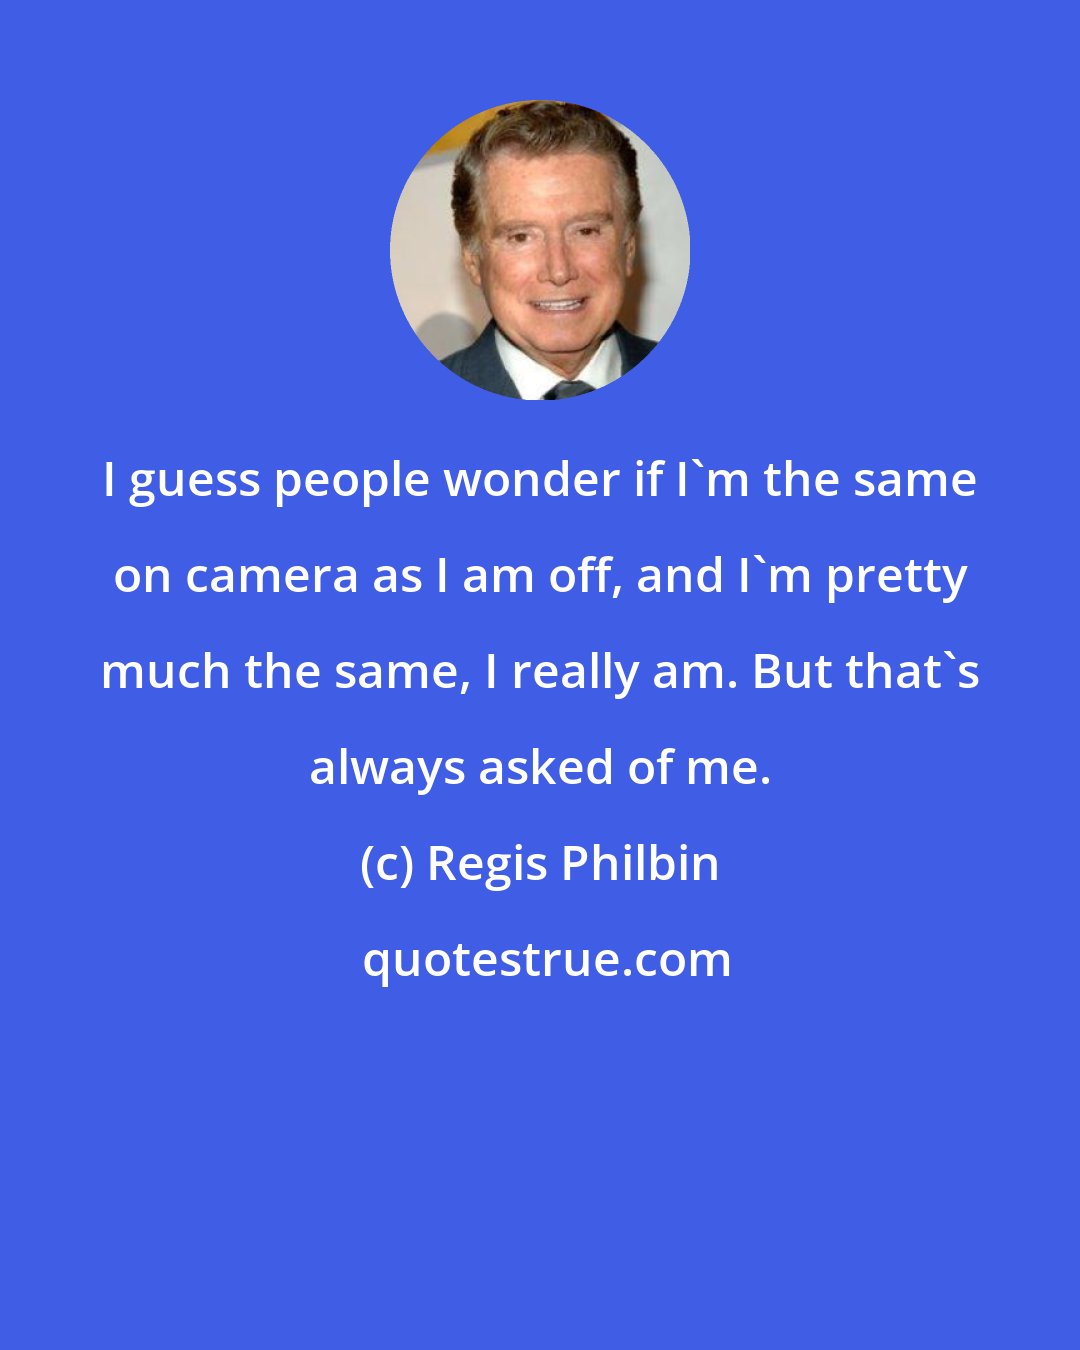 Regis Philbin: I guess people wonder if I'm the same on camera as I am off, and I'm pretty much the same, I really am. But that's always asked of me.